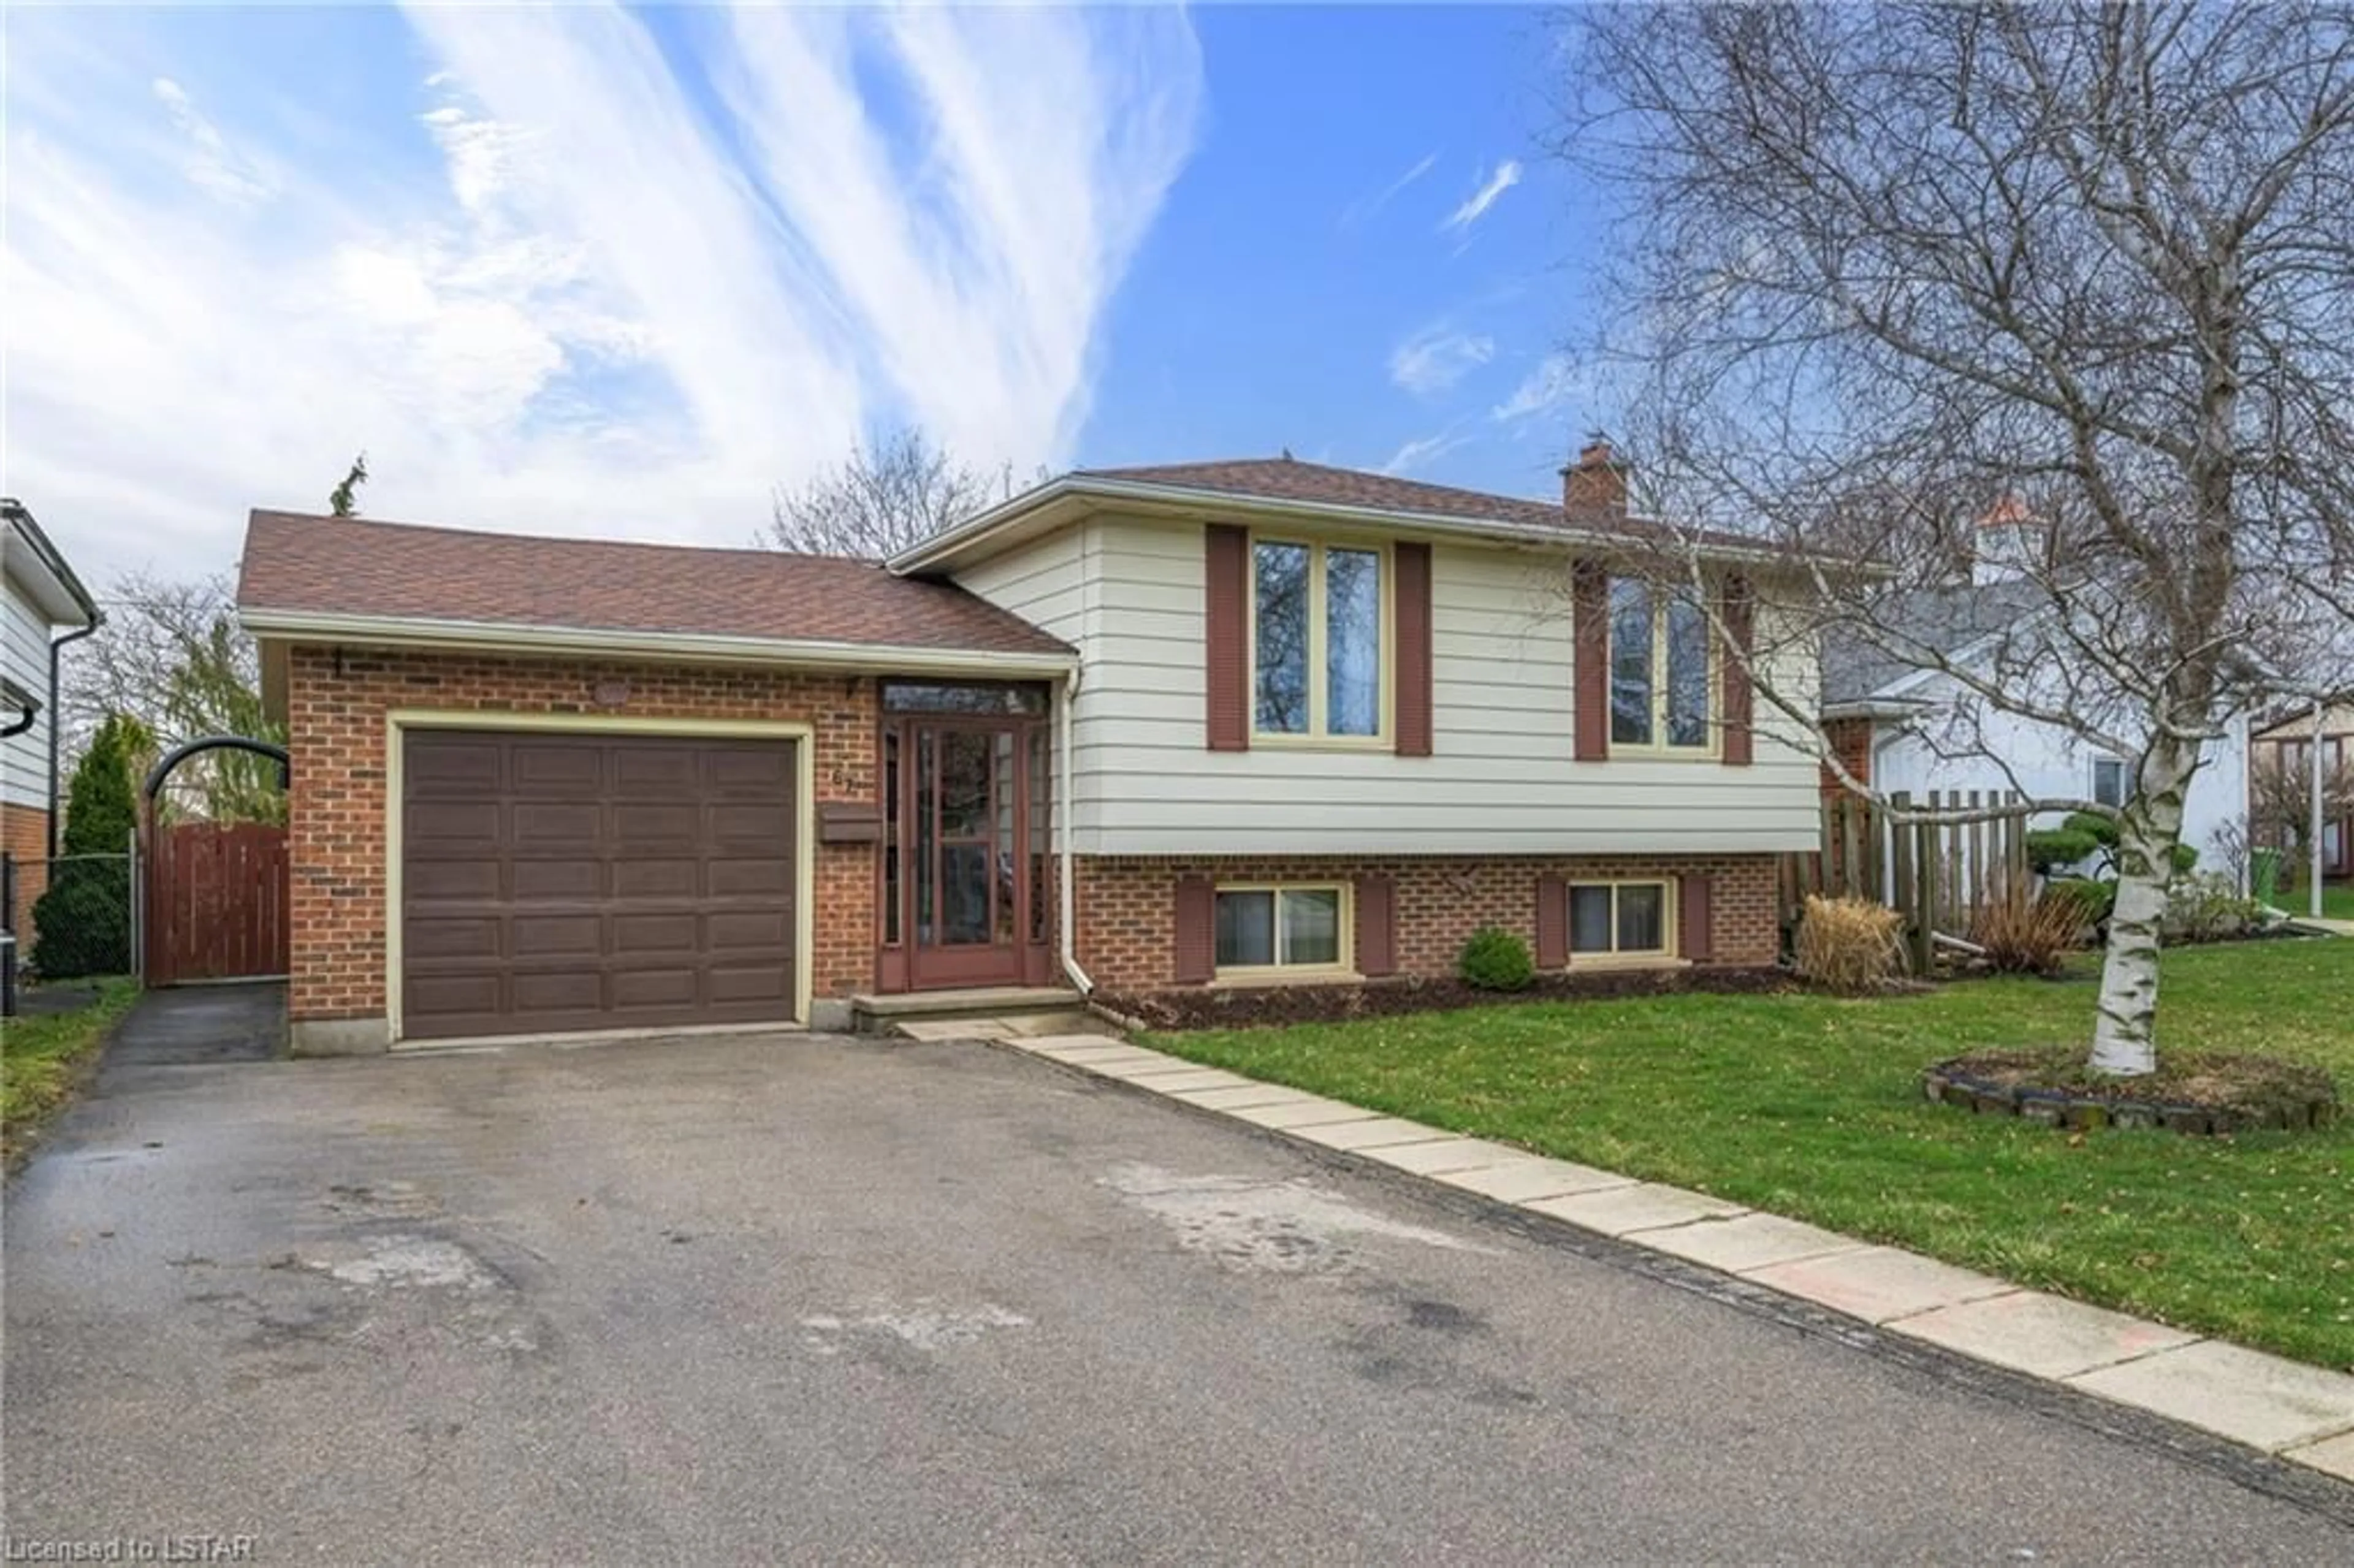 Home with brick exterior material for 67 Manor Rd, St. Thomas Ontario N5R 5R3